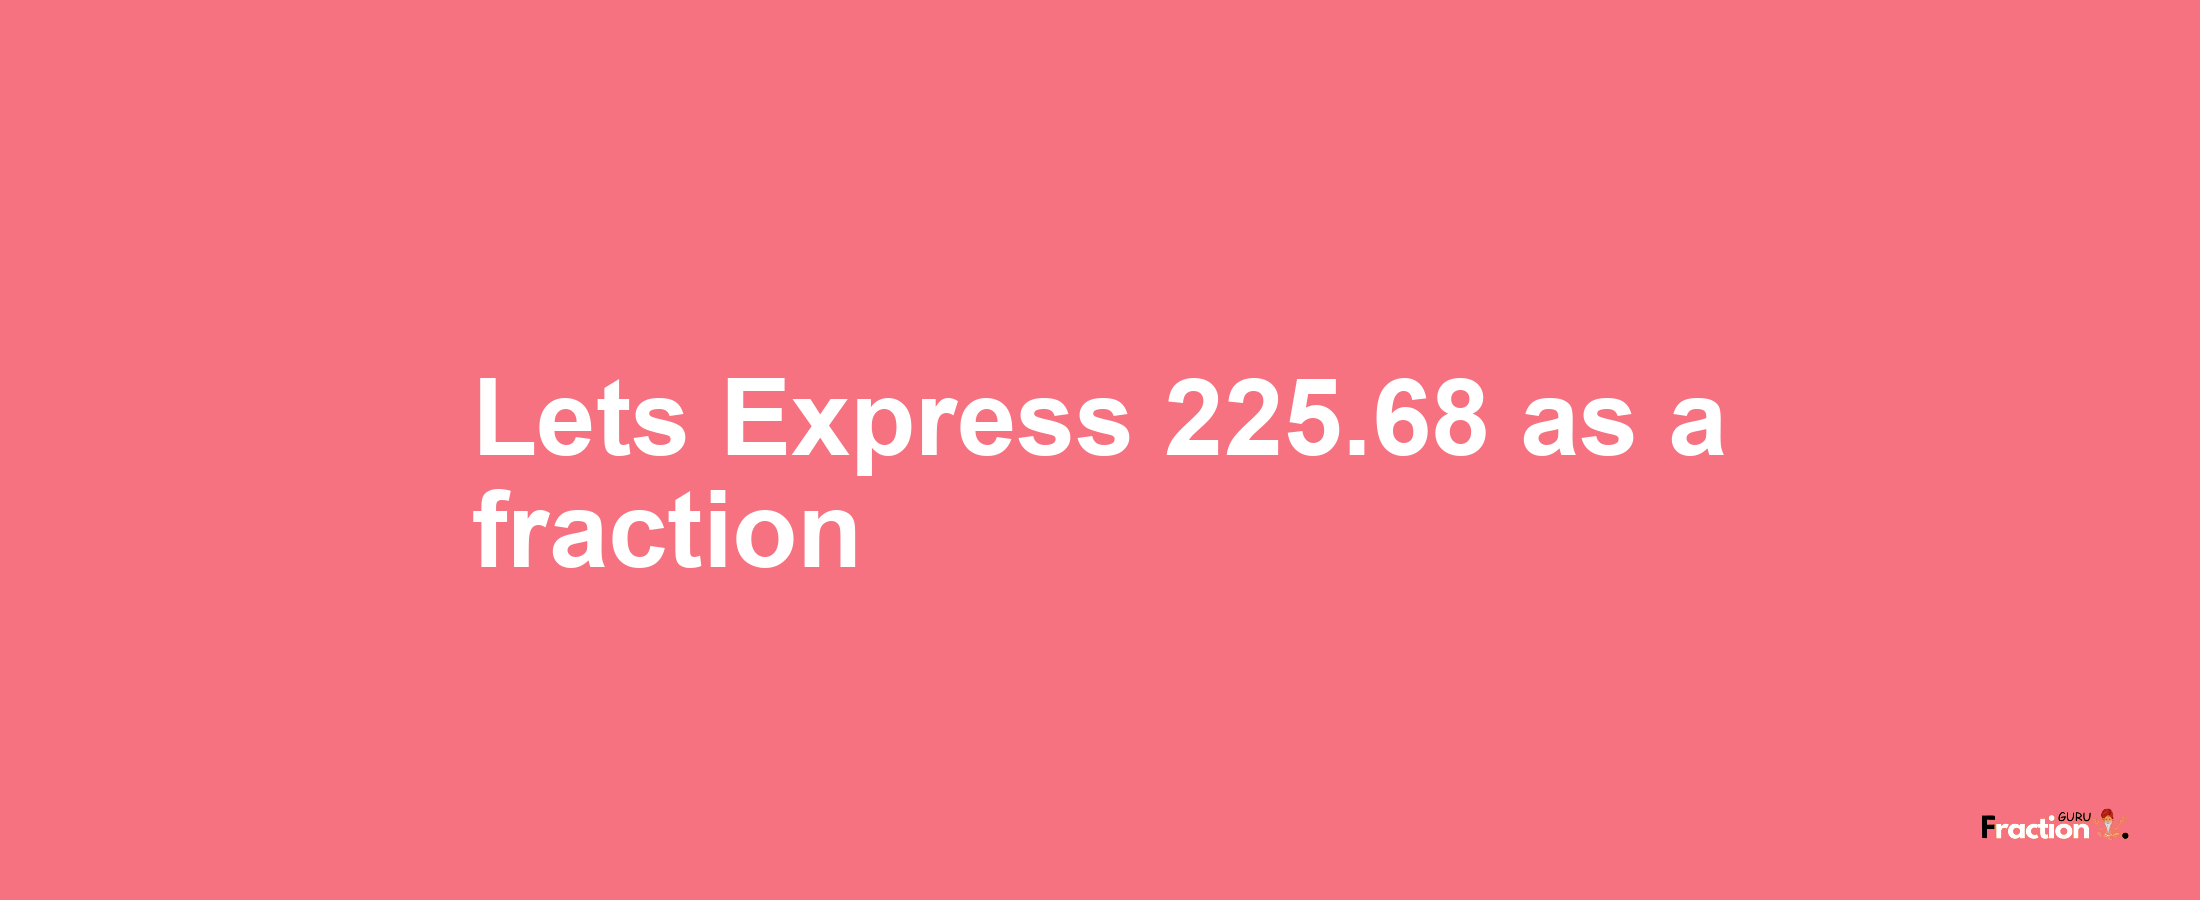 Lets Express 225.68 as afraction